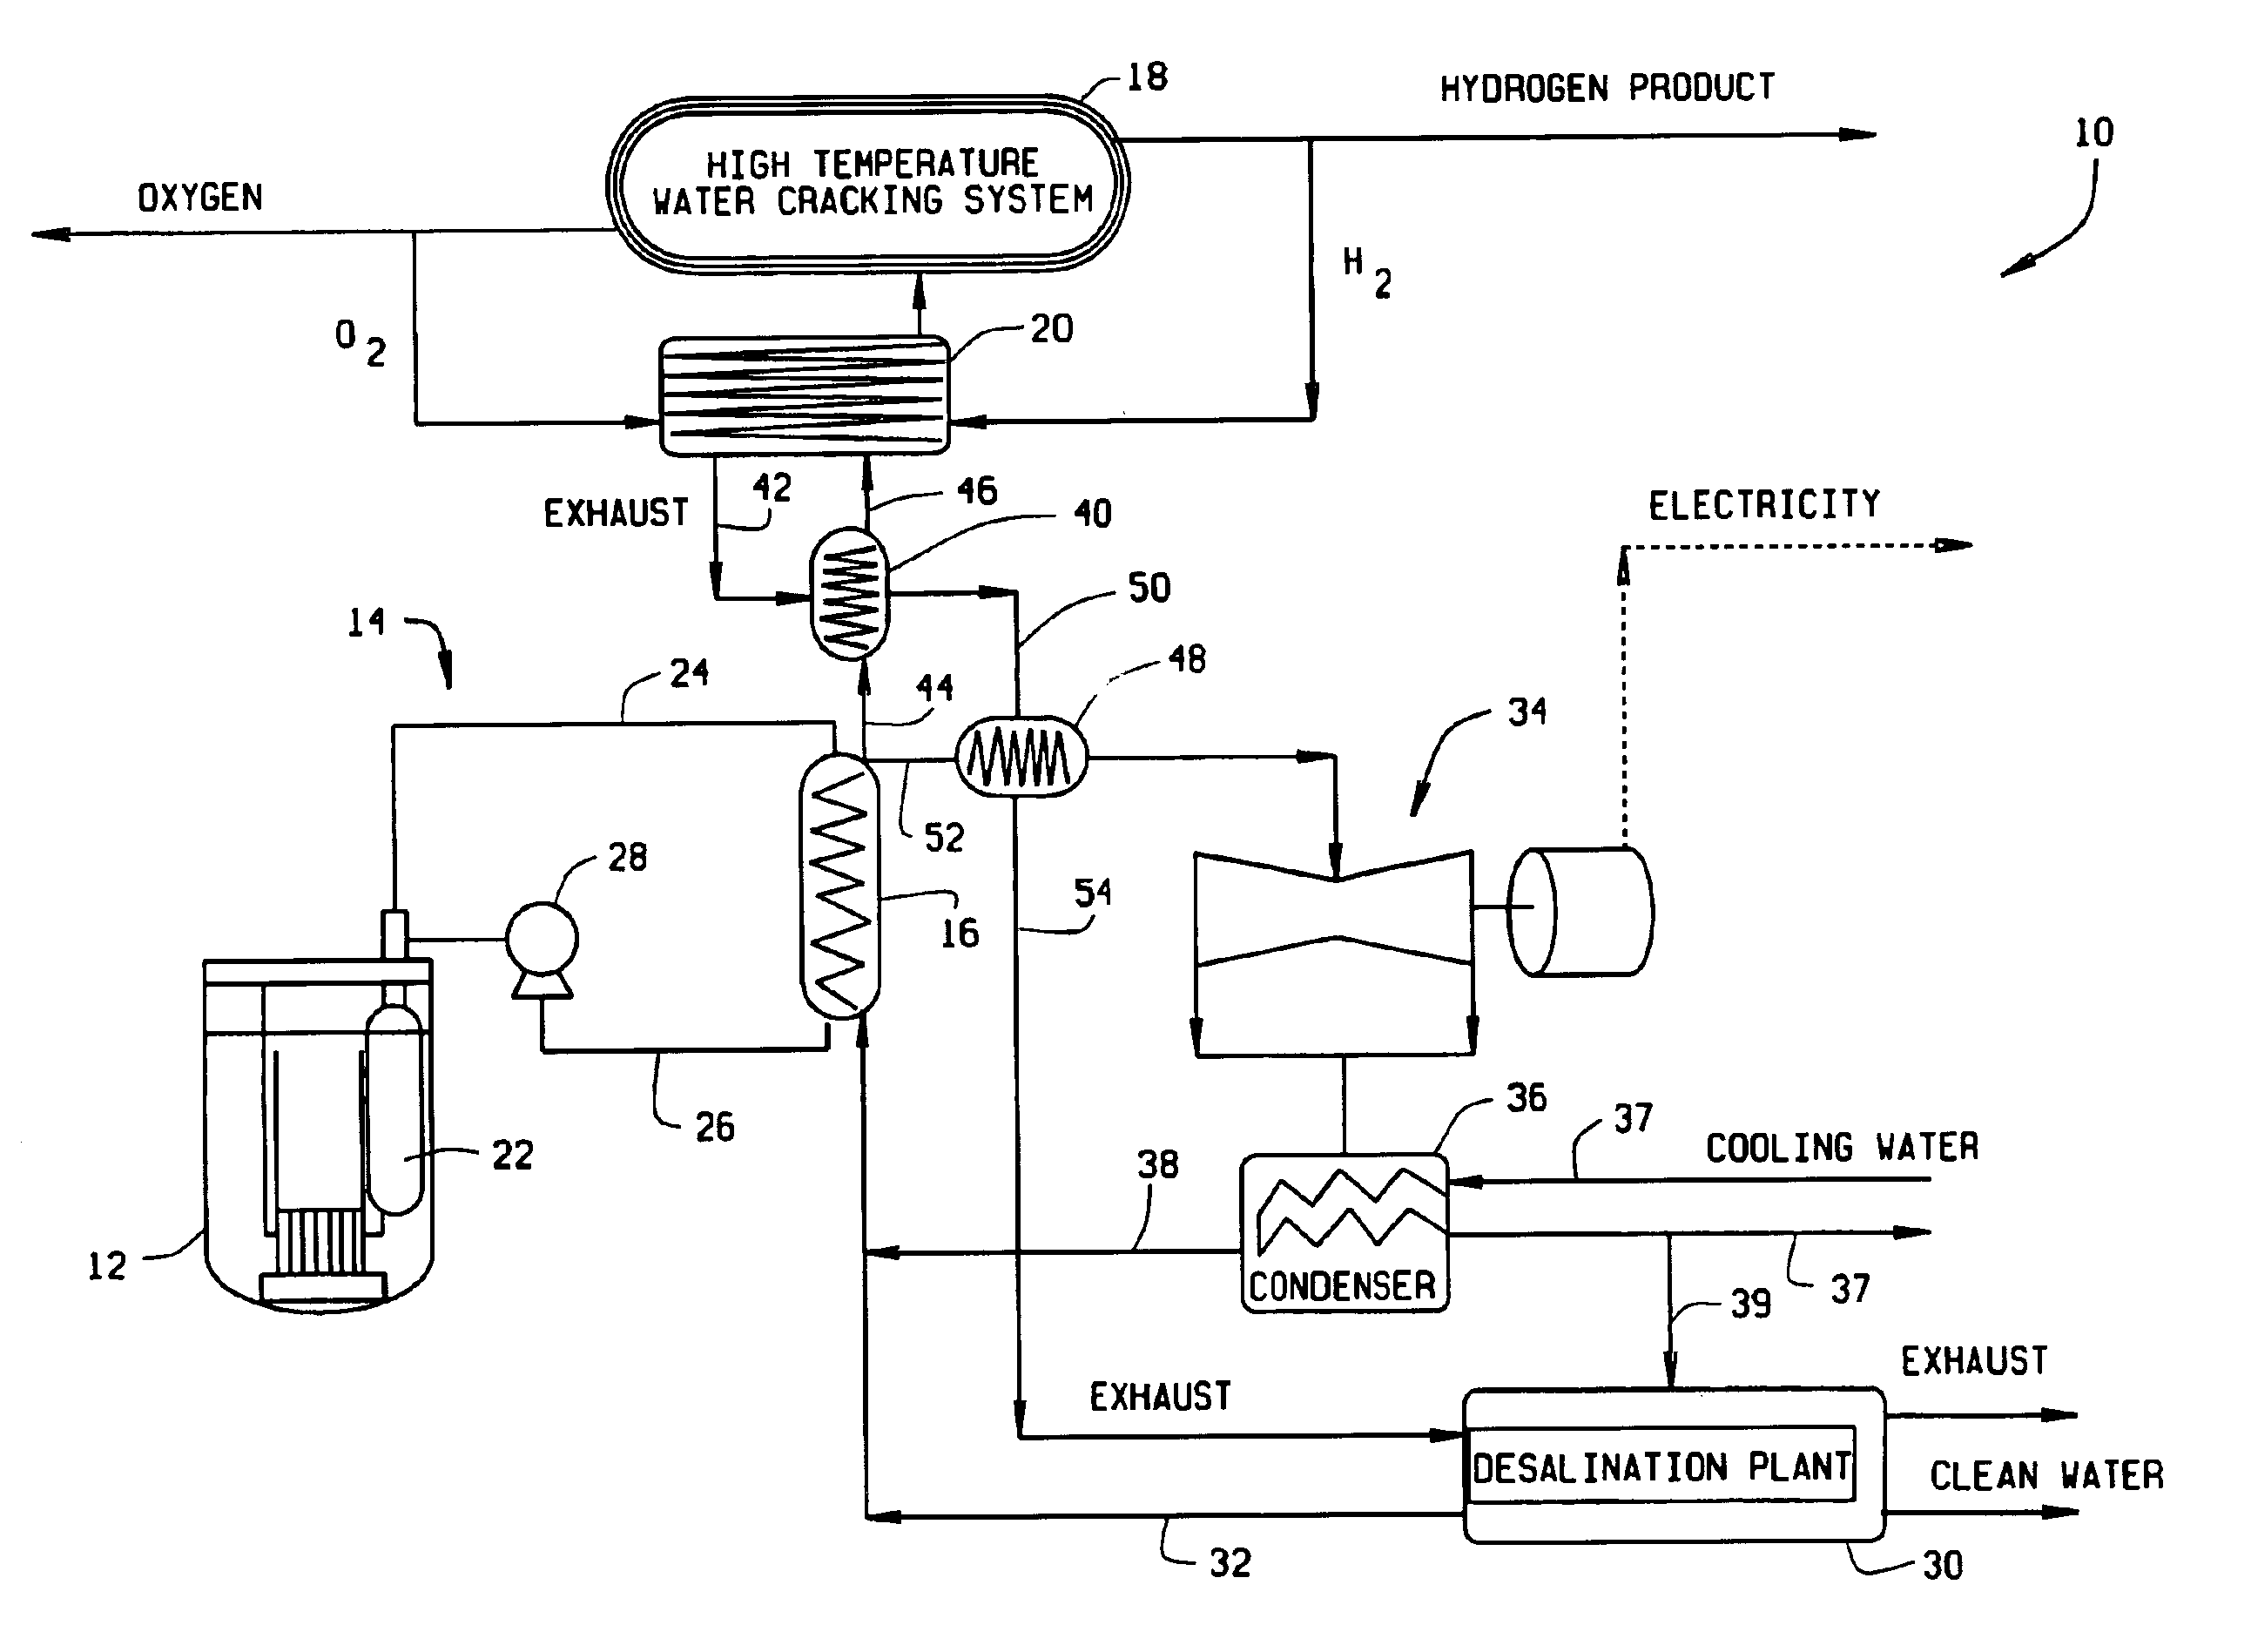 Systems and methods of producing hydrogen using a nuclear reactor